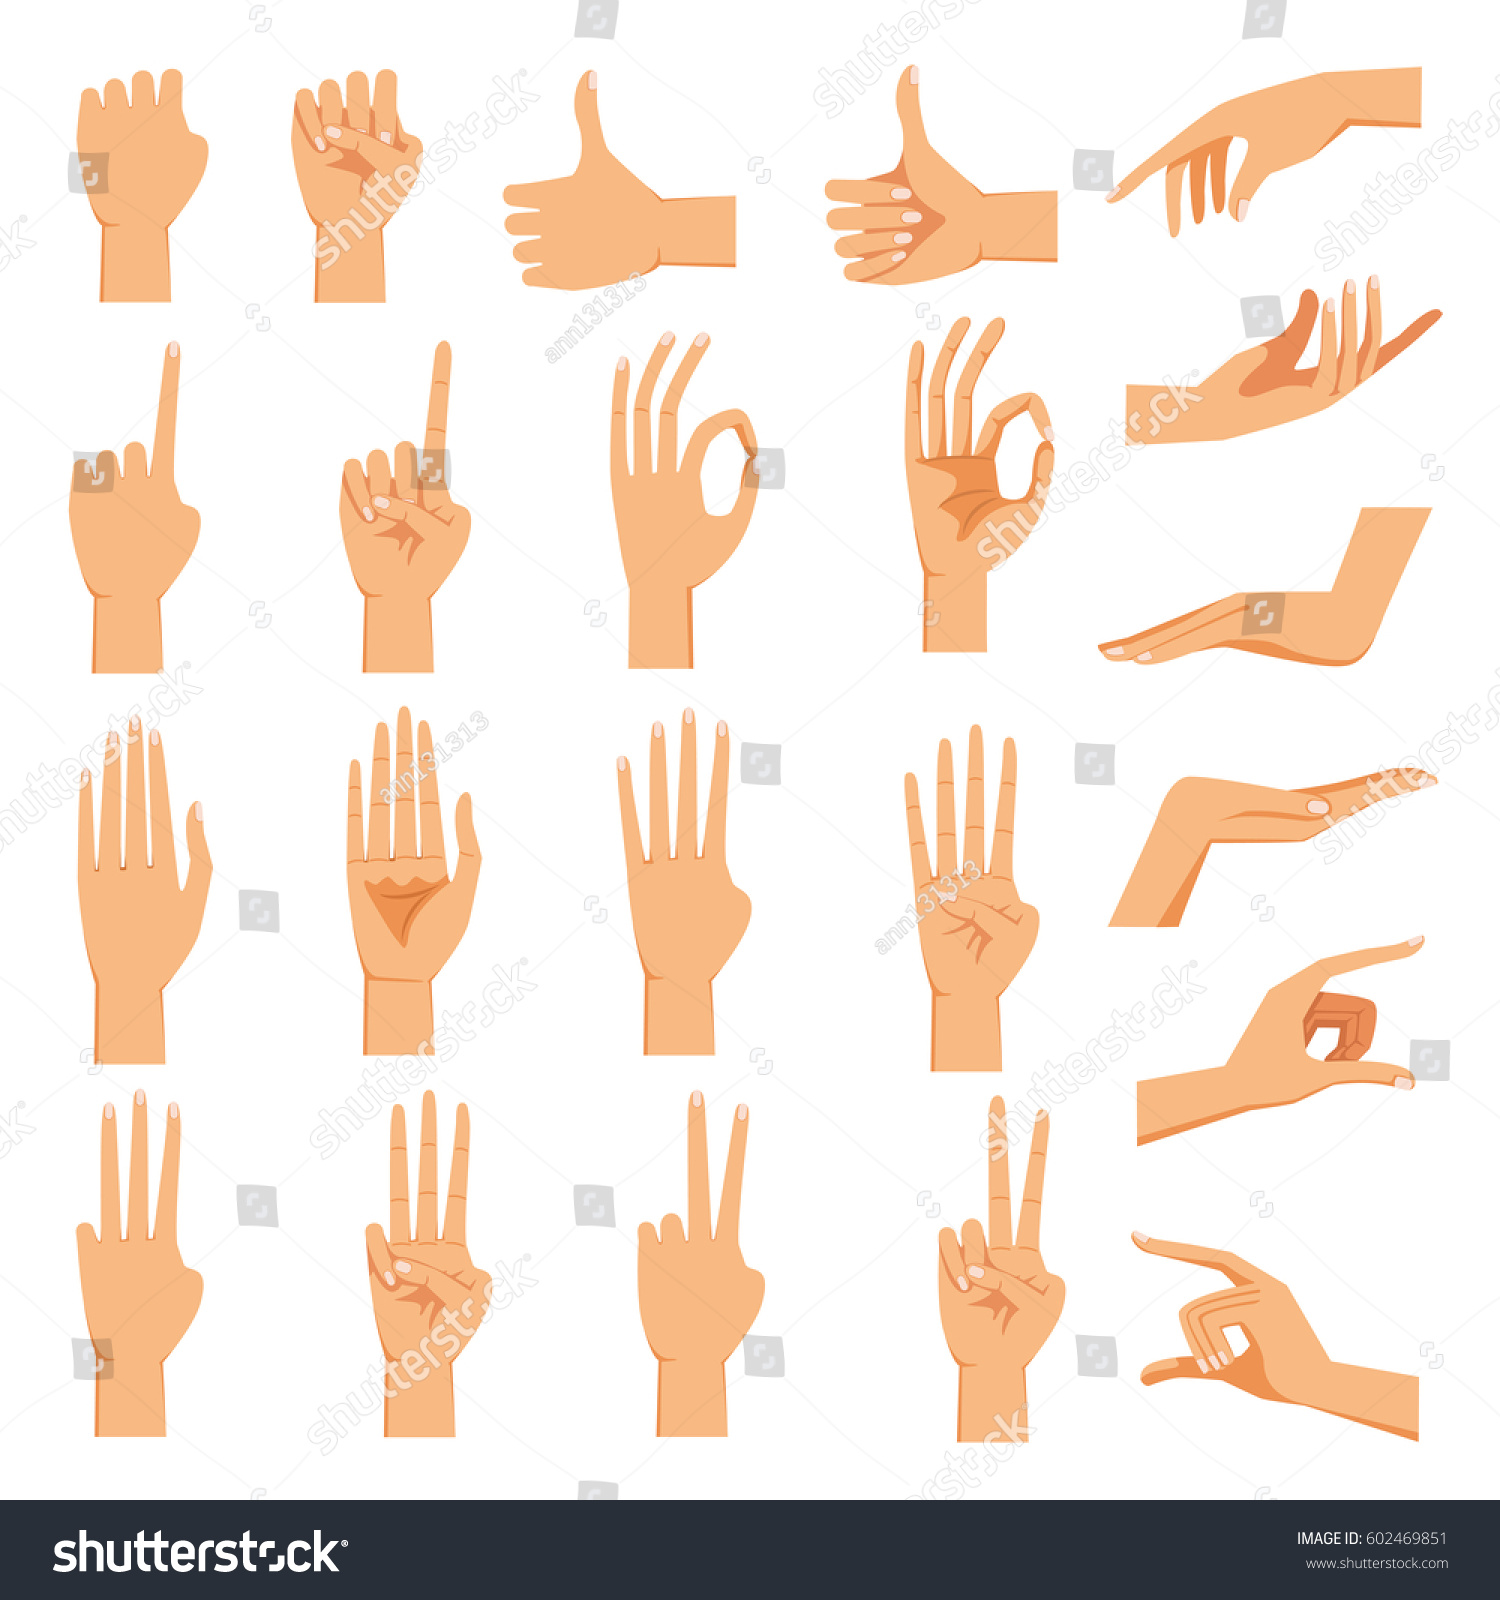 1,083 Back Of Hands Skin Graphic Images, Stock Photos & Vectors ...